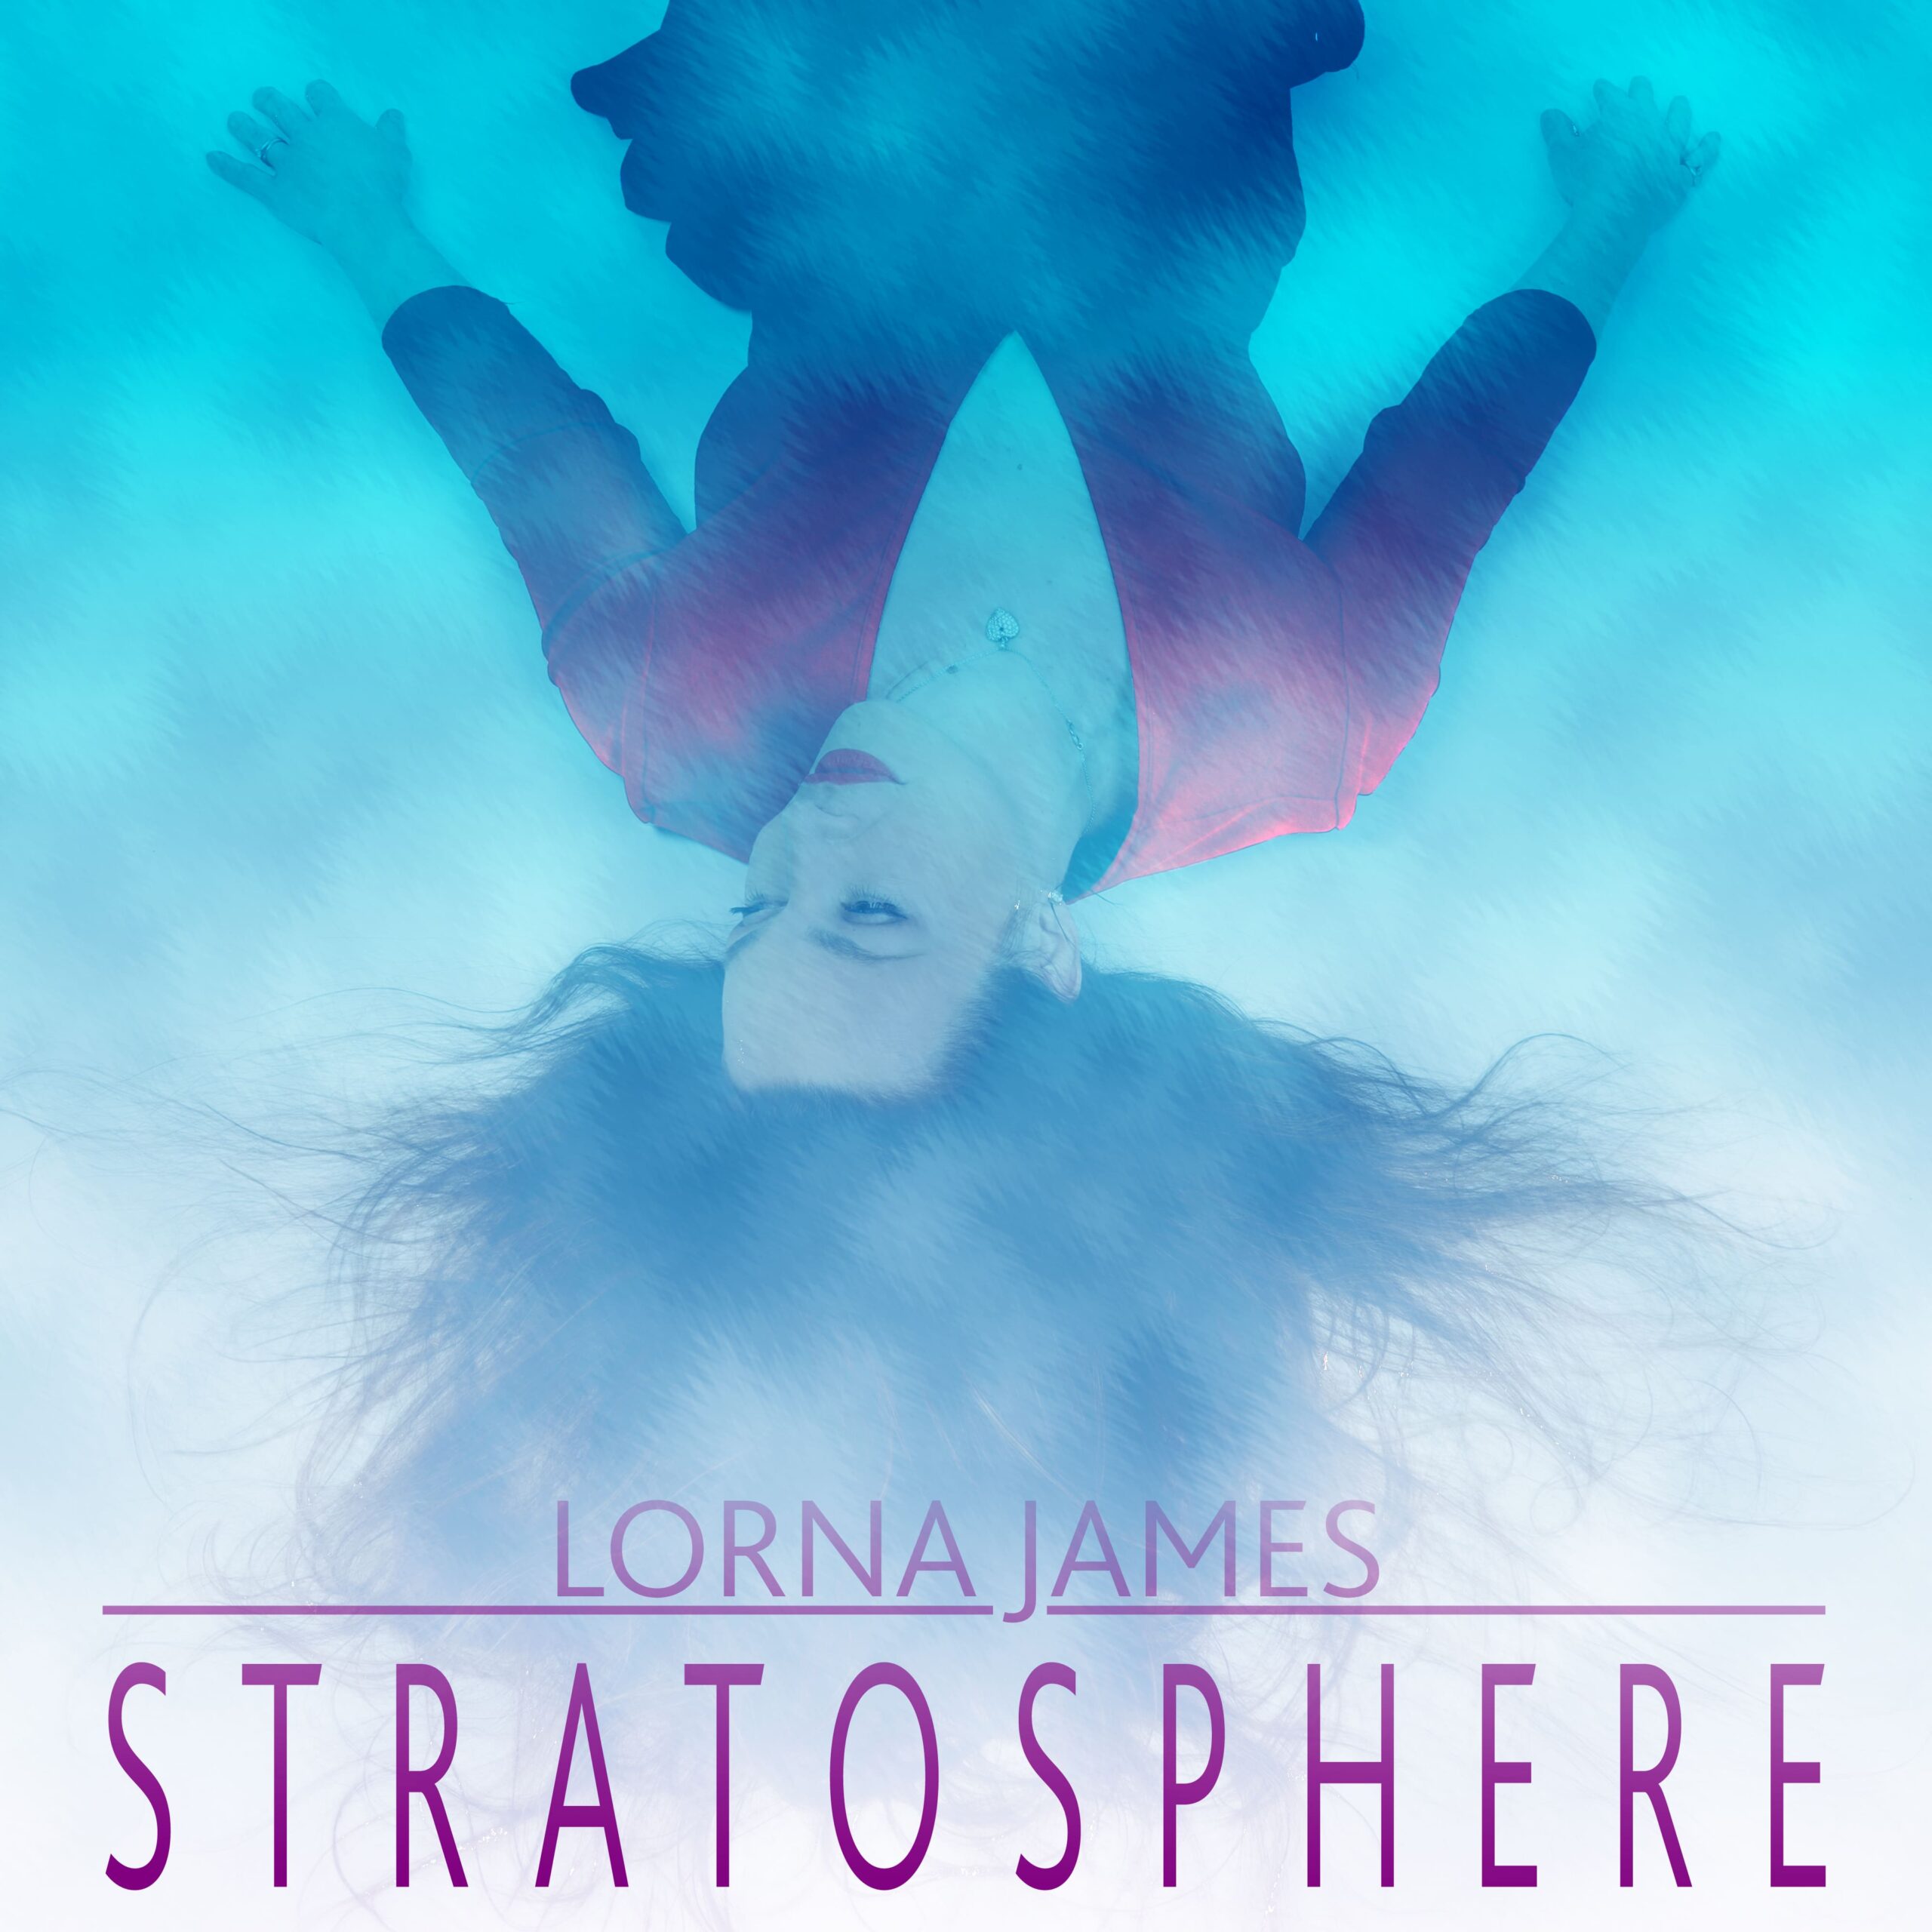 Lorna James' Debut Ambient Album 'Stratosphere' Takes Listeners on a Sonic Journey